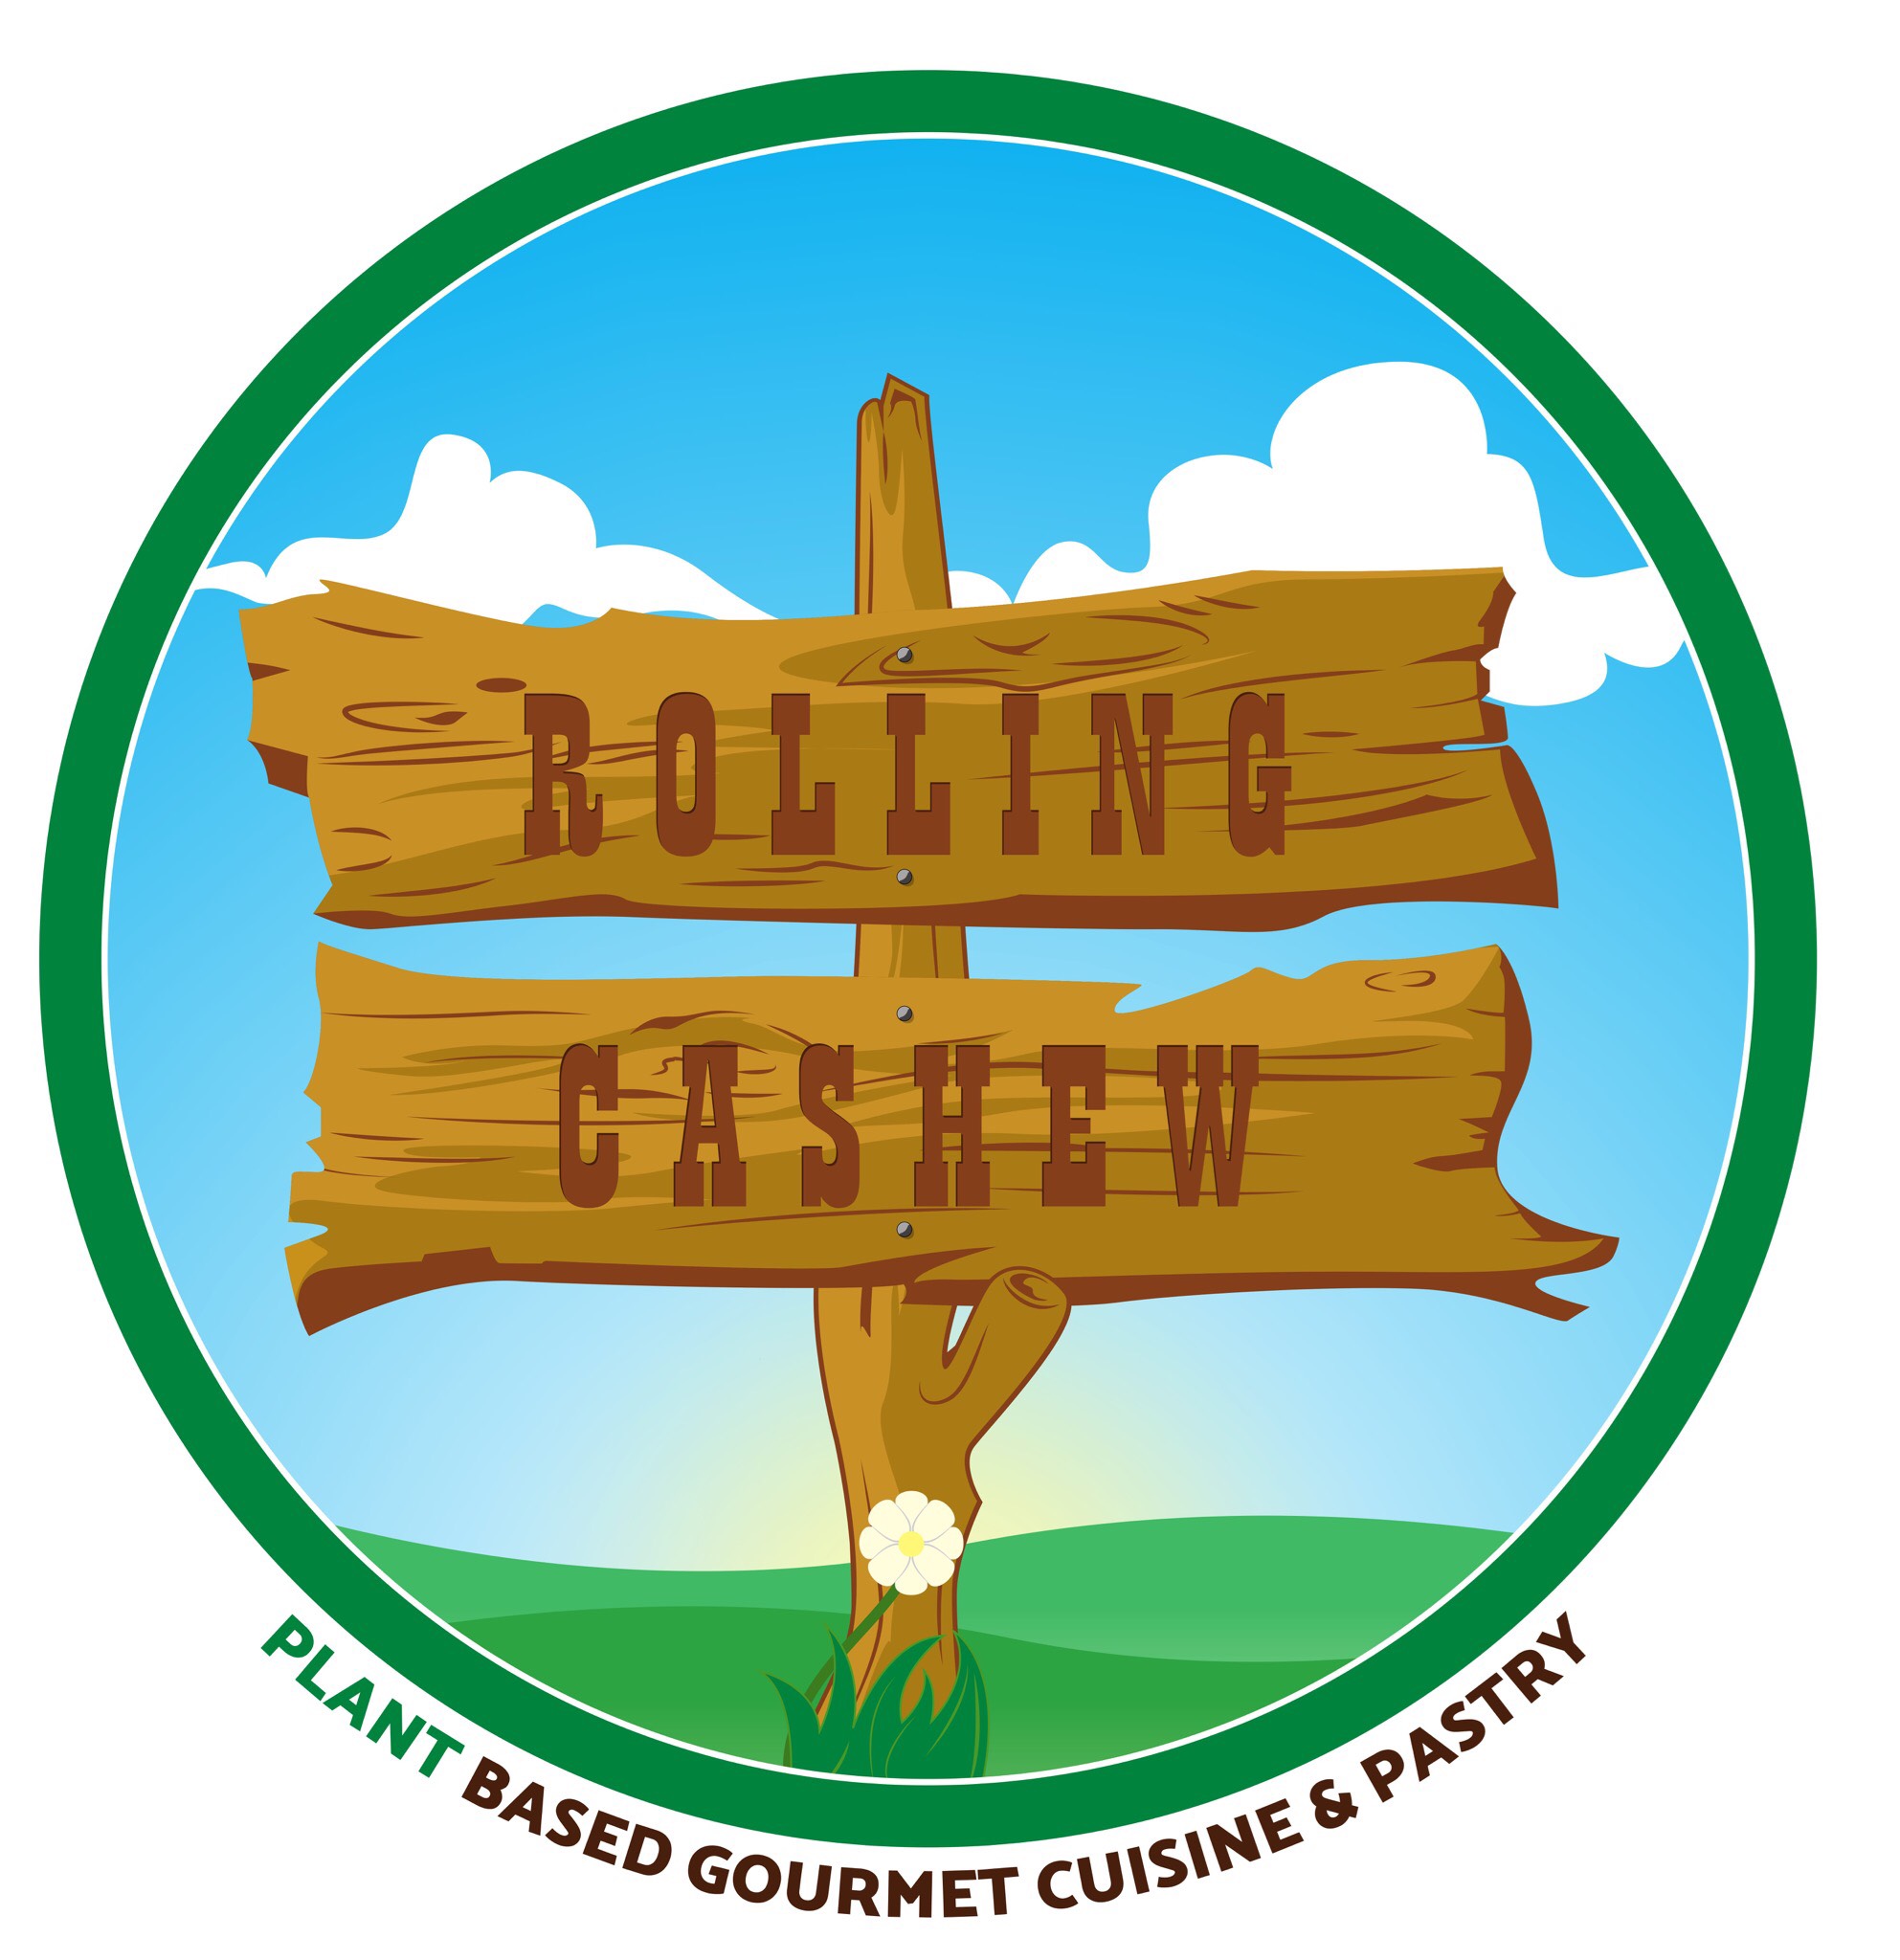 The Rolling Cashew